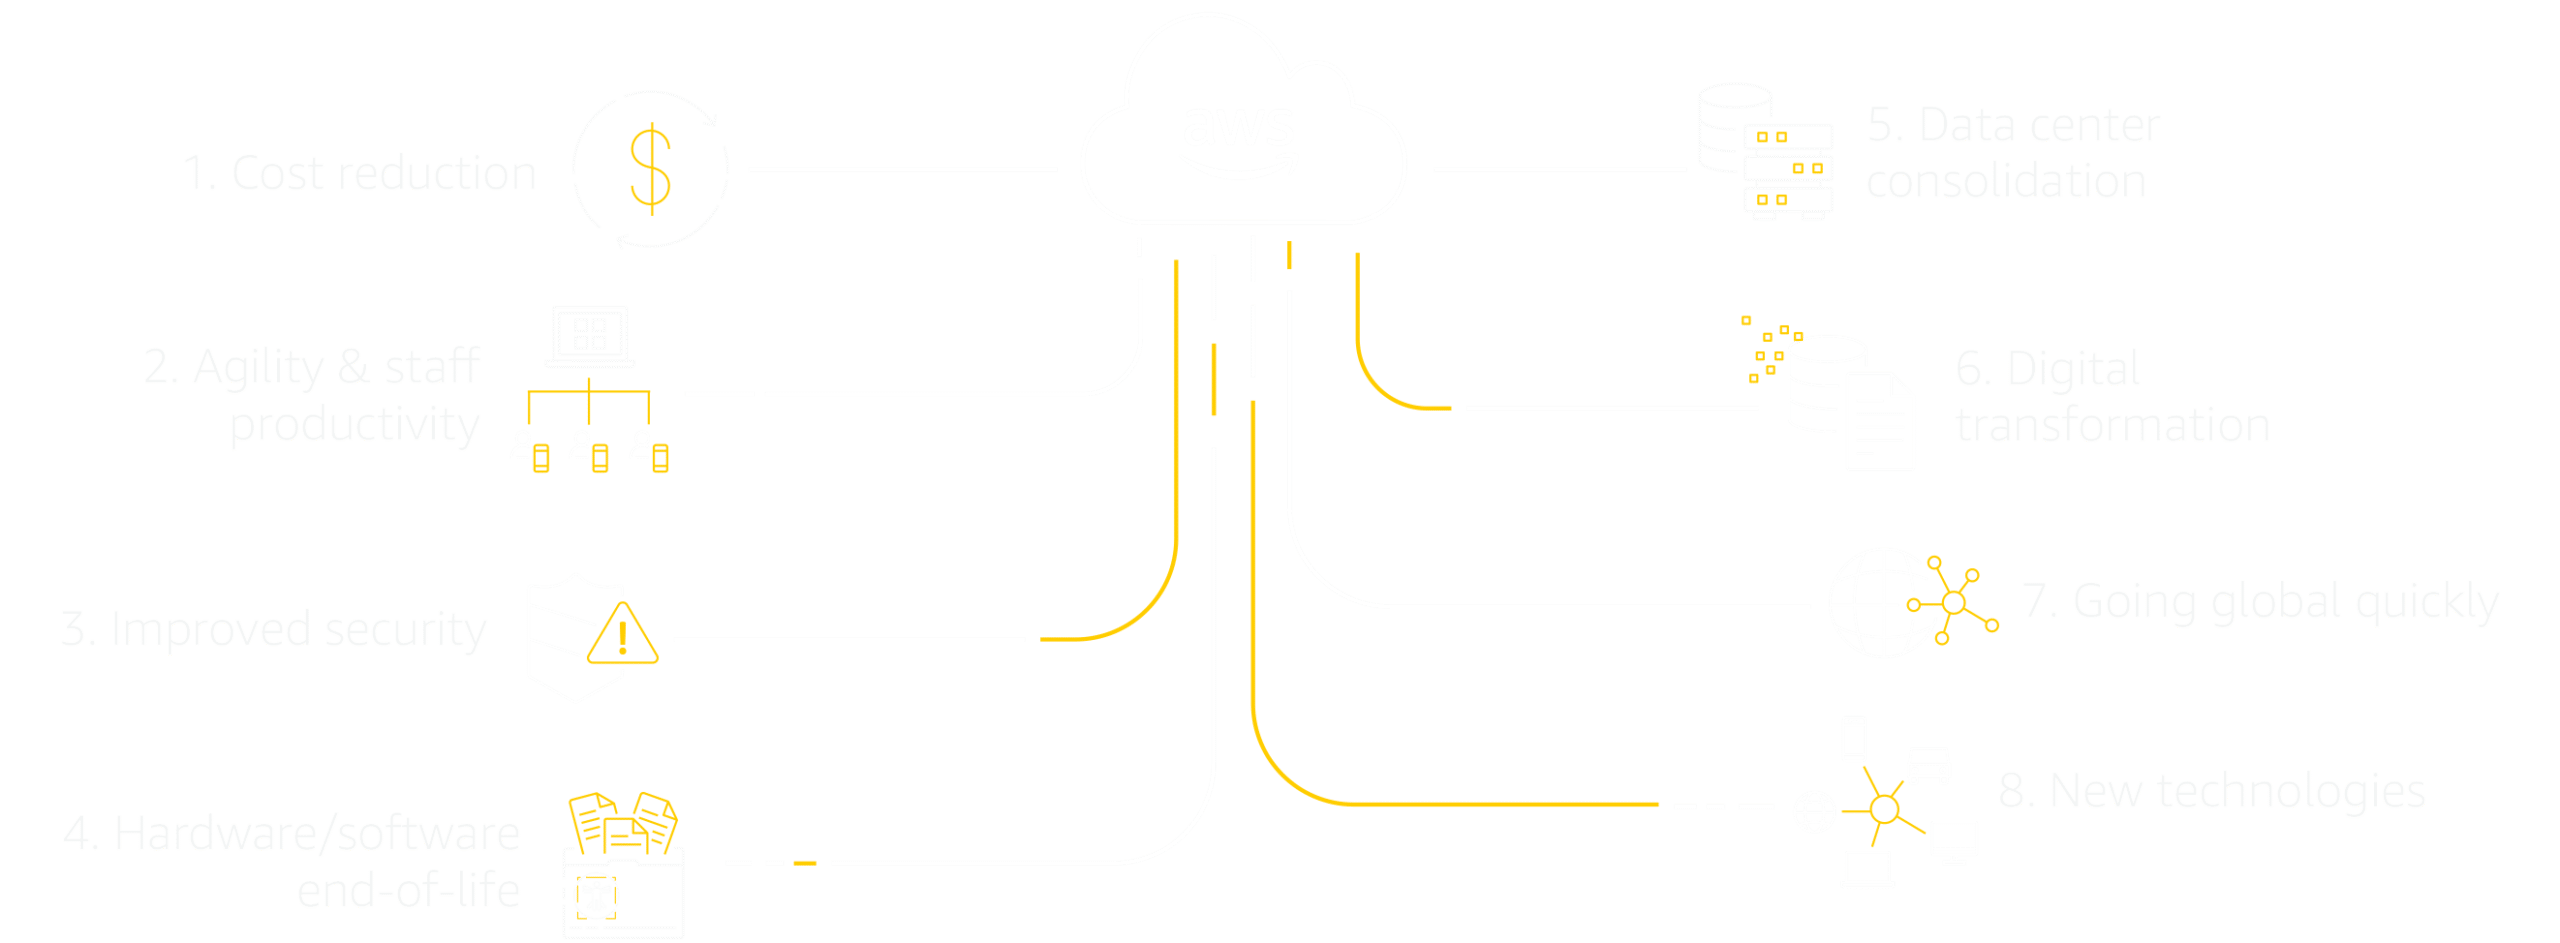 8 Business Drivers for Migrating to the AWS cloud